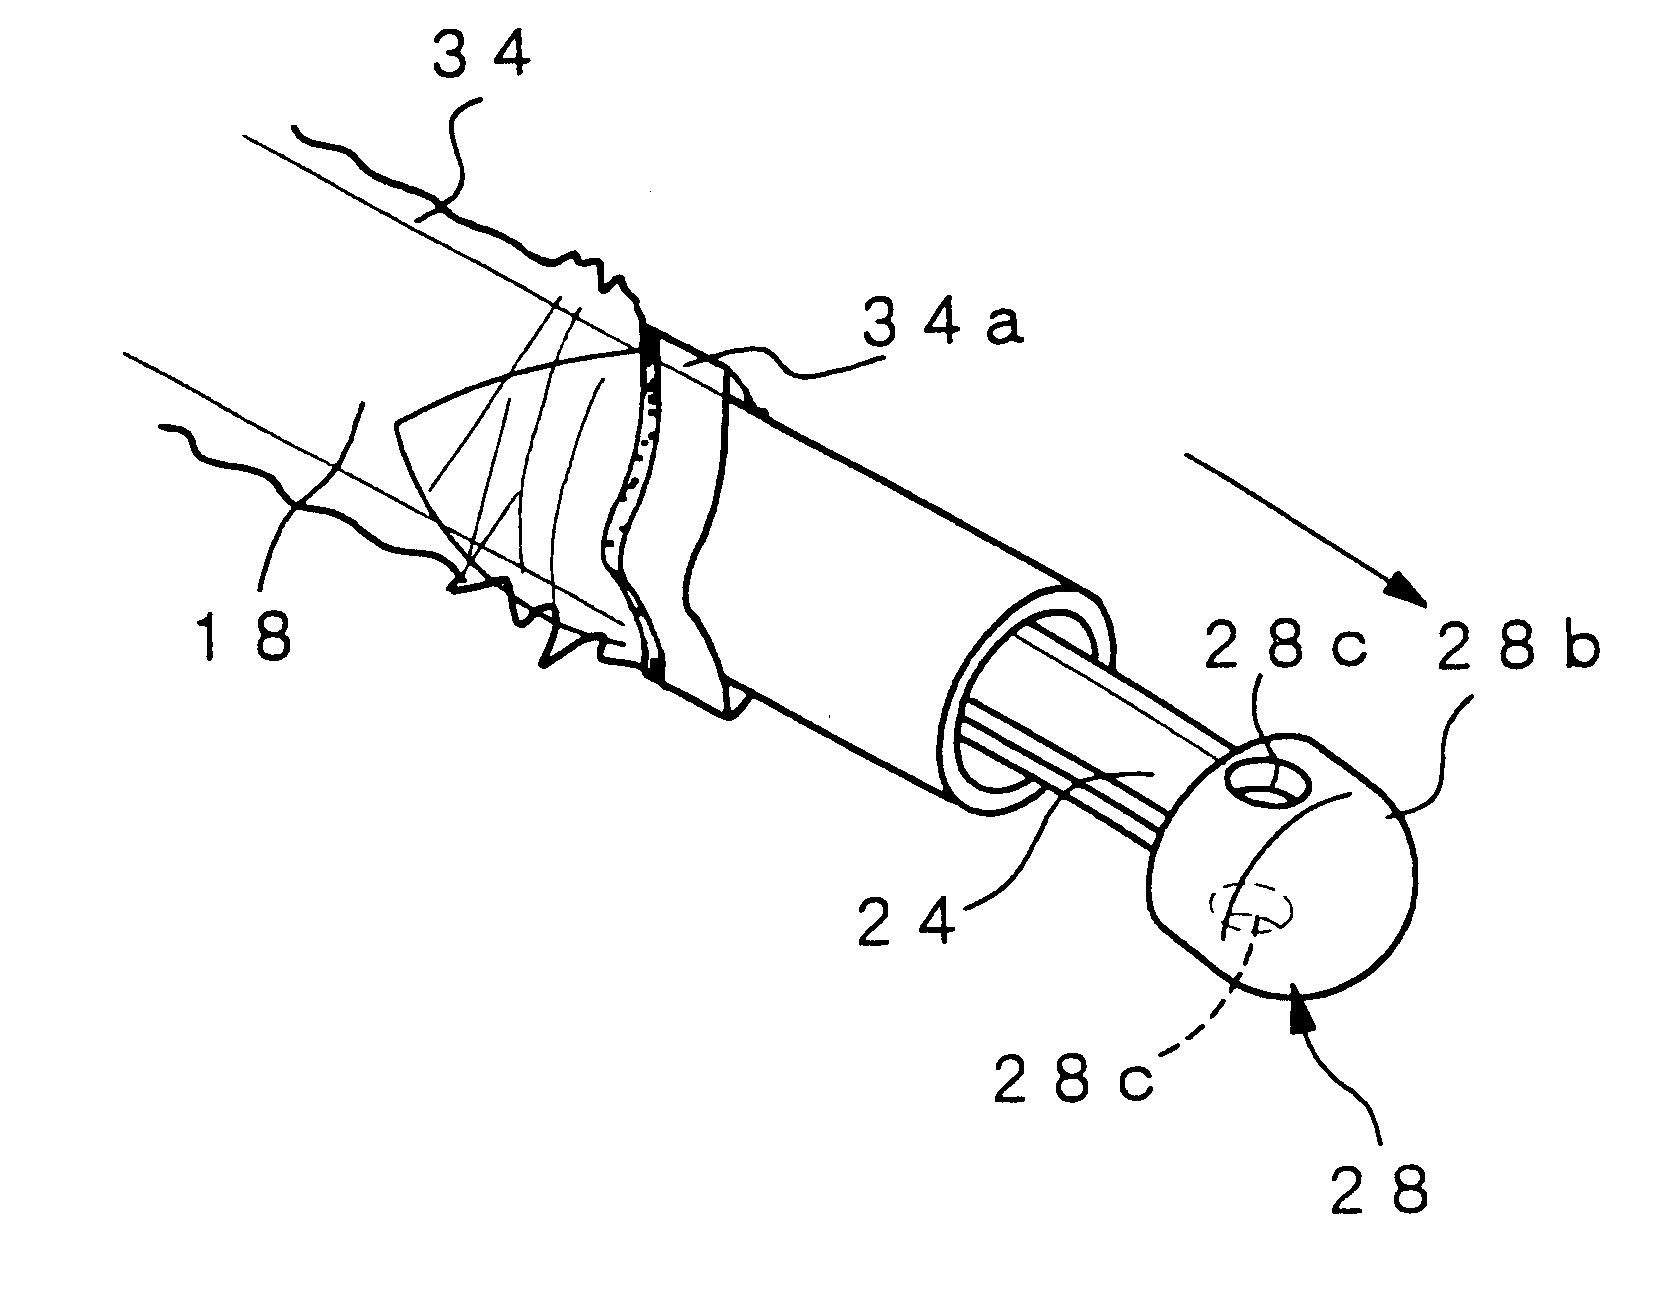 Injector of sperm for artificial insemination or fertilized ovum for transplantation of domestic animal and method of operating thereof